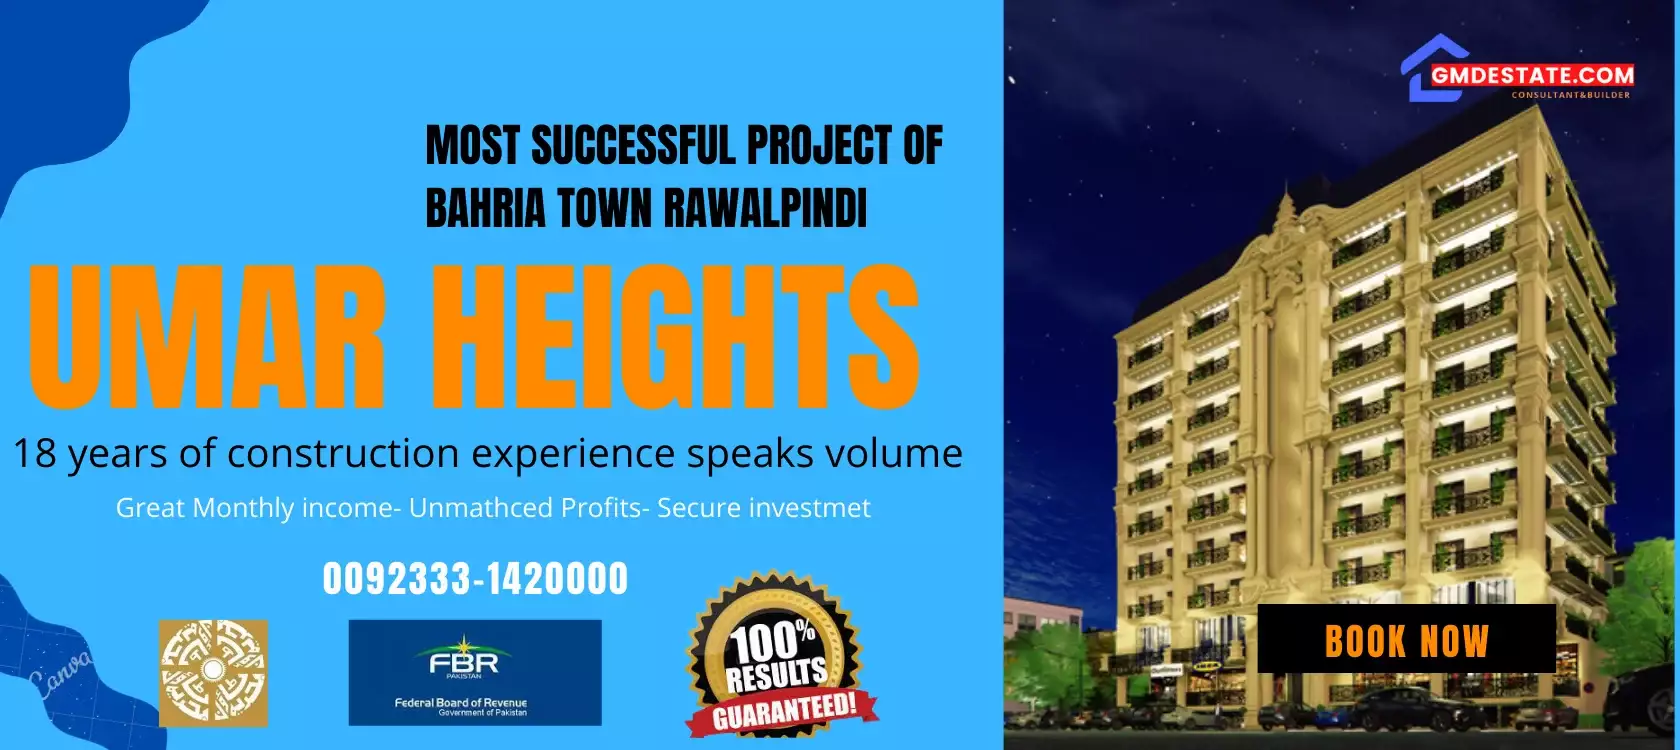 apartments-shops-offices-bahriatown